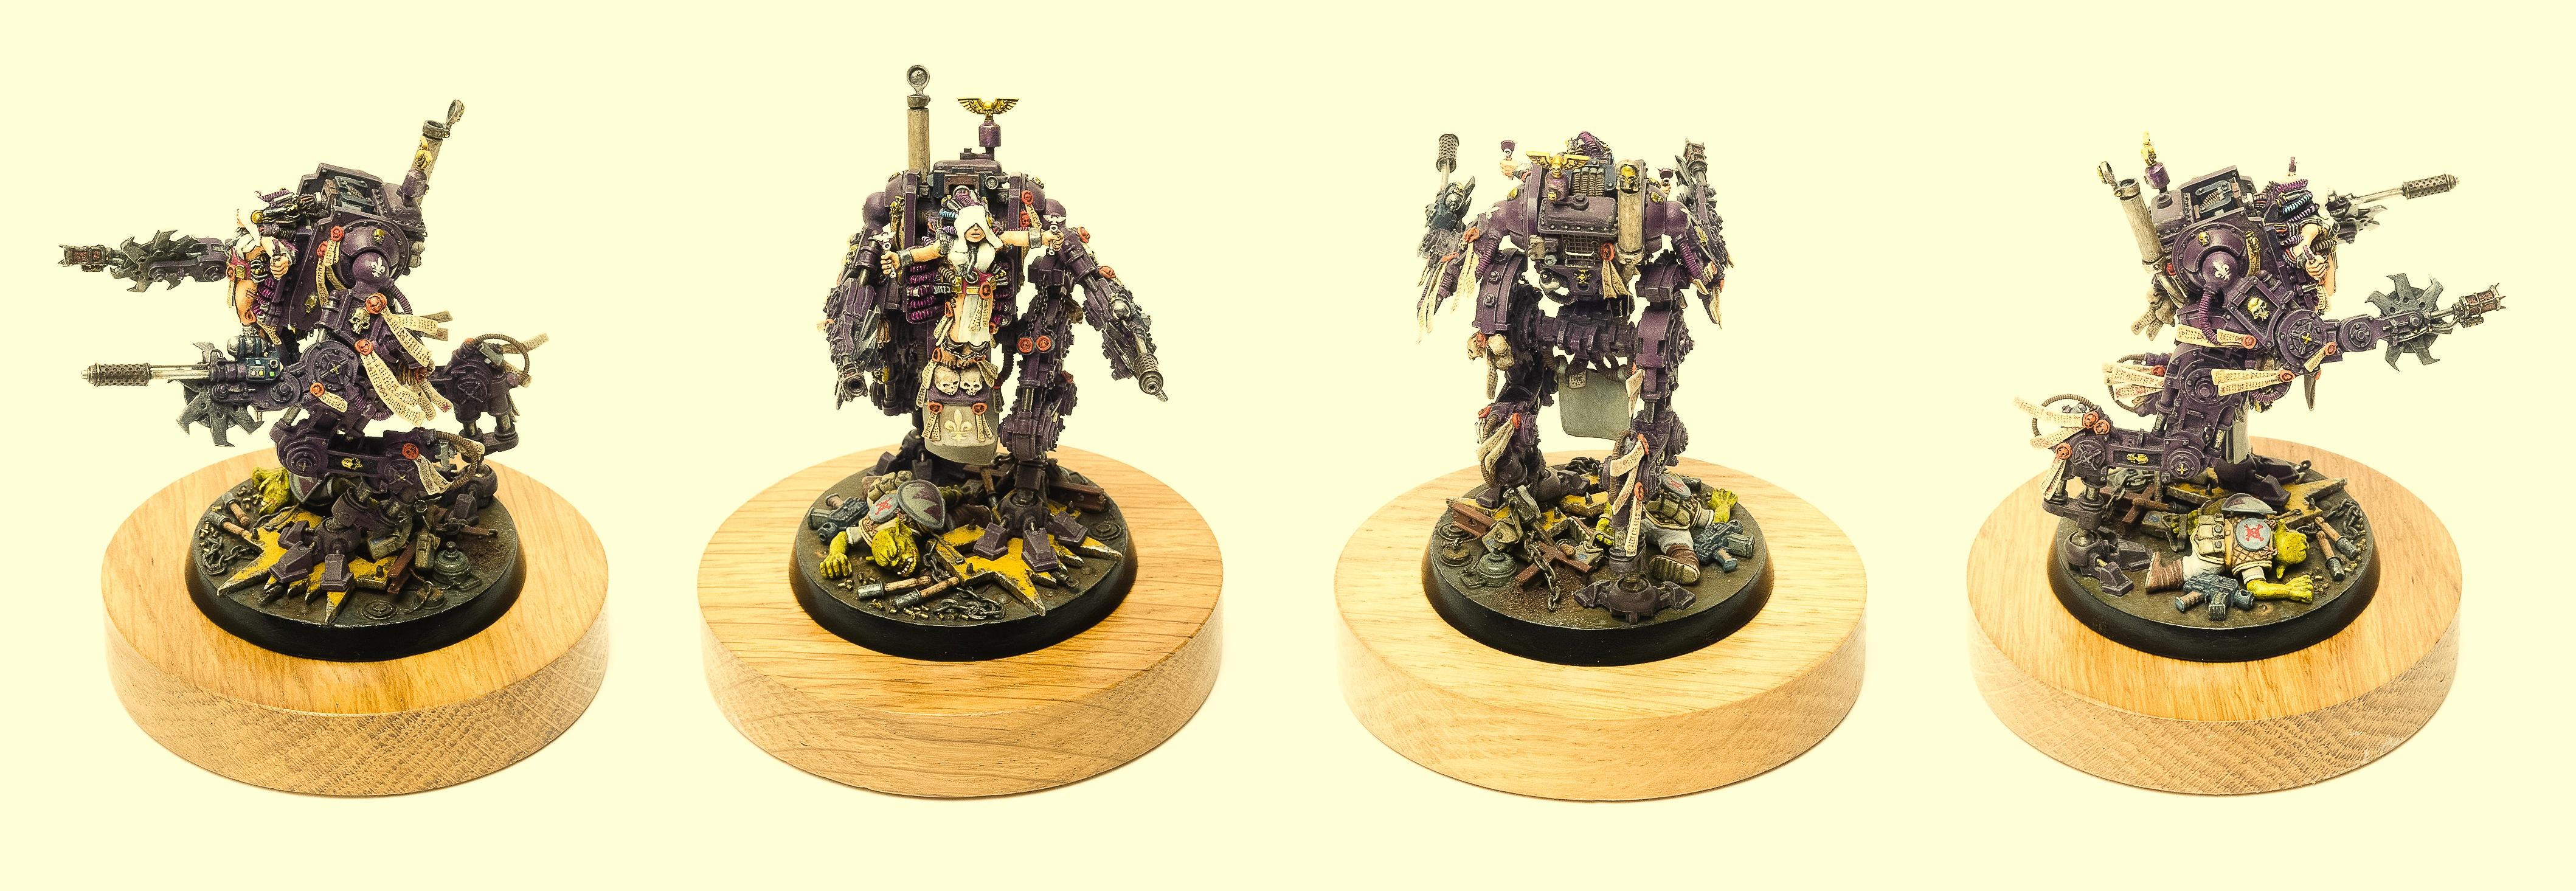 Sisters of Battle Penitent Engine panorama